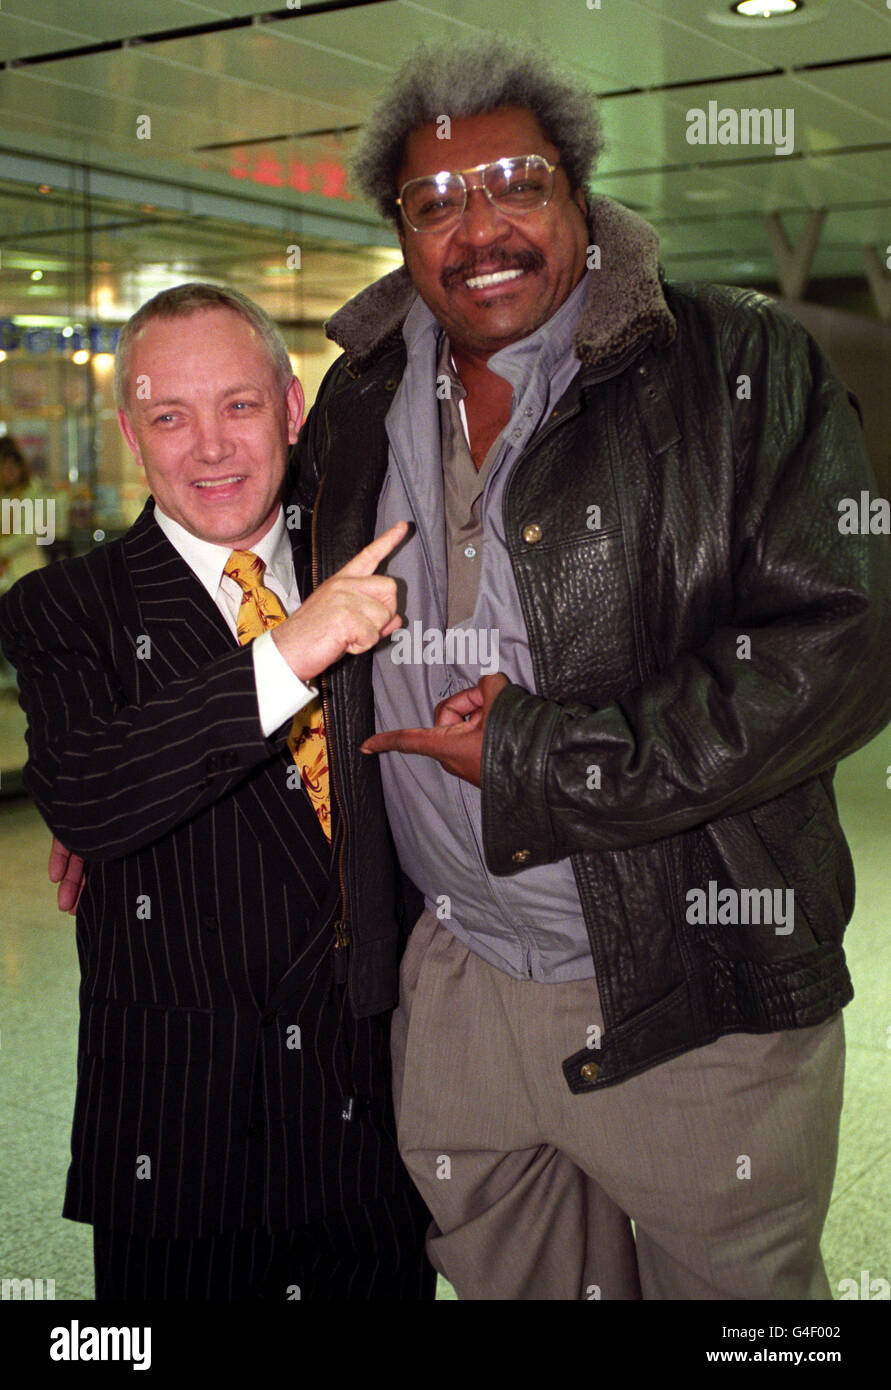 Larger-than-life American promoter Don King, right, meeting with boxing manager Frank Maloney, who represents WBC champion Lennox Lewis, in London, after Mr King made a forthright claim he is going to give the world the title the match it demands - Lennox Lewis against Evander Holyfield. Stock Photo